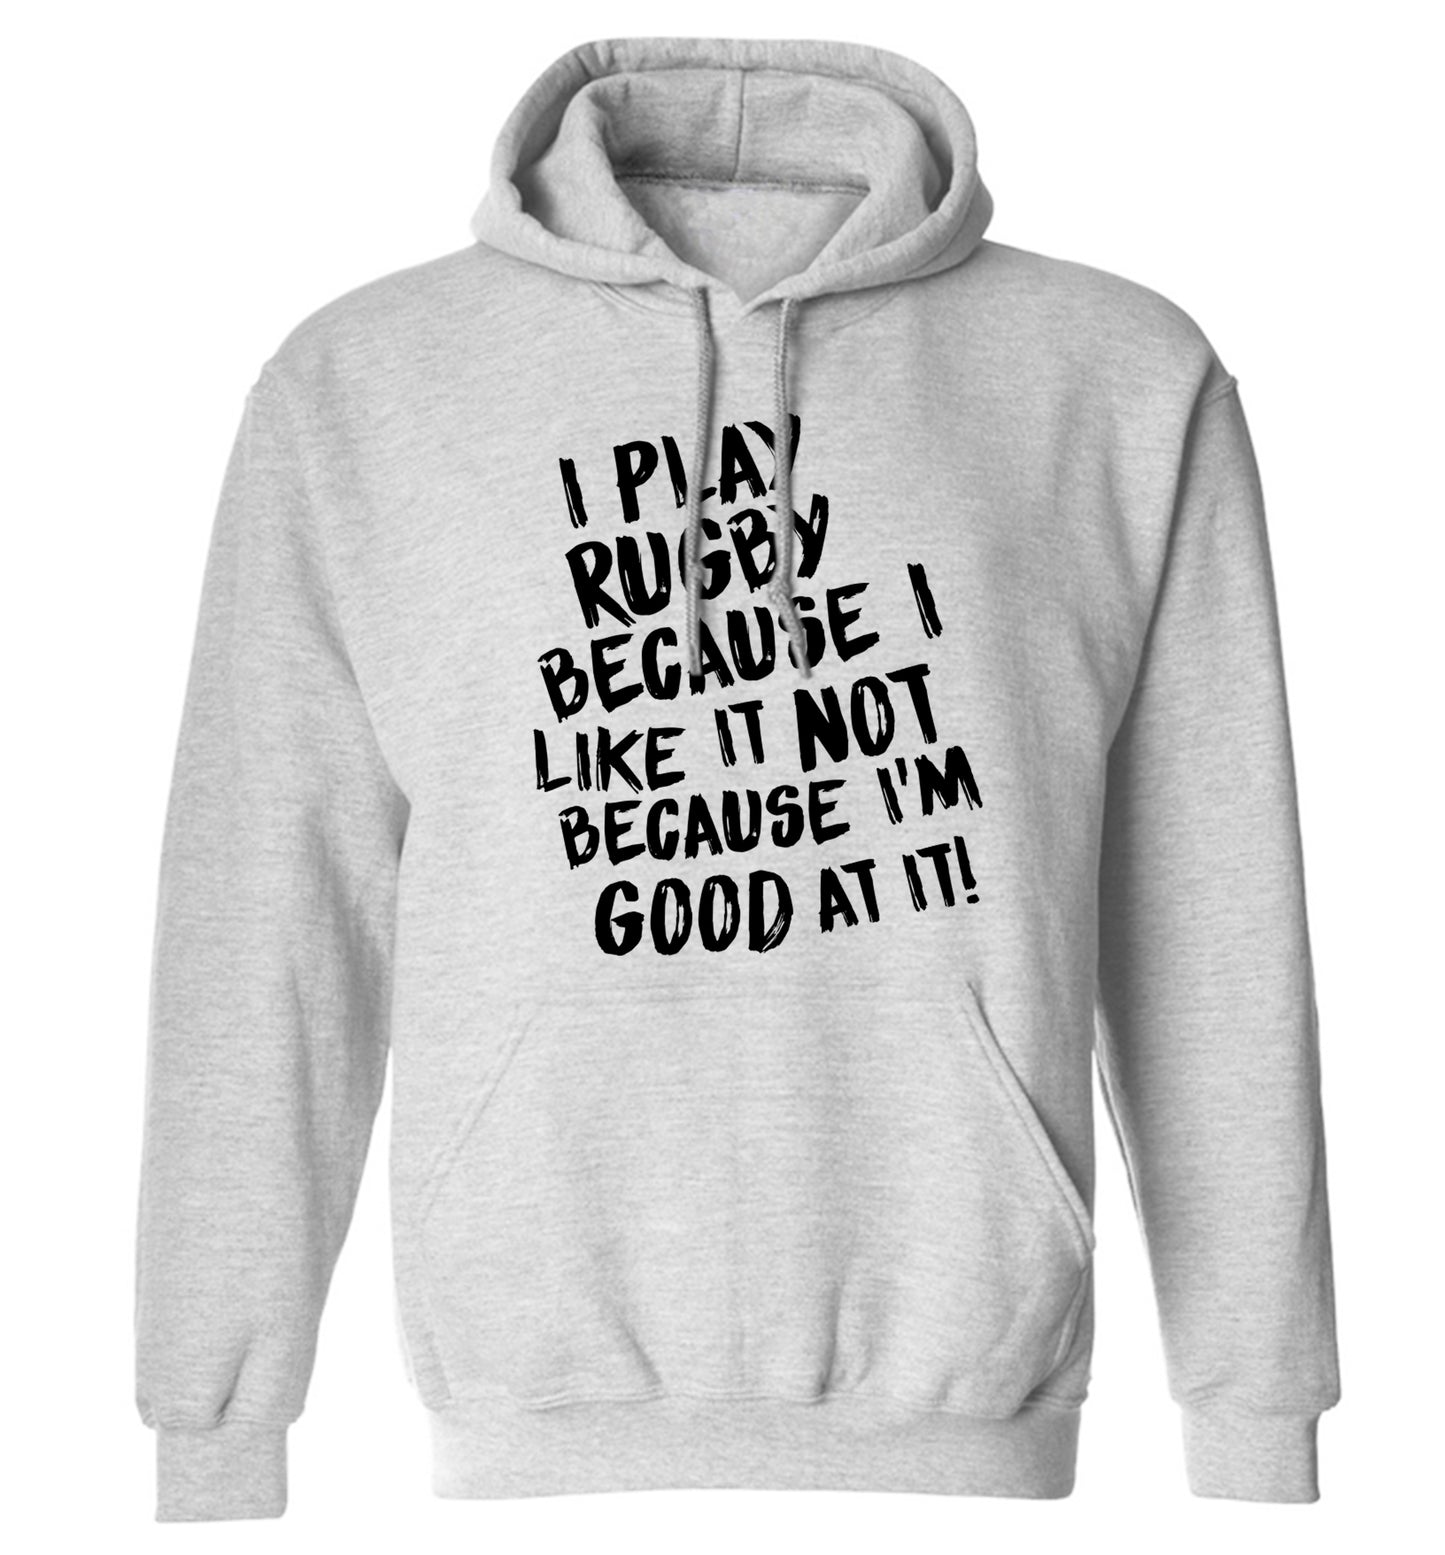 I play rugby because I like it not because I'm good at it adults unisex grey hoodie 2XL